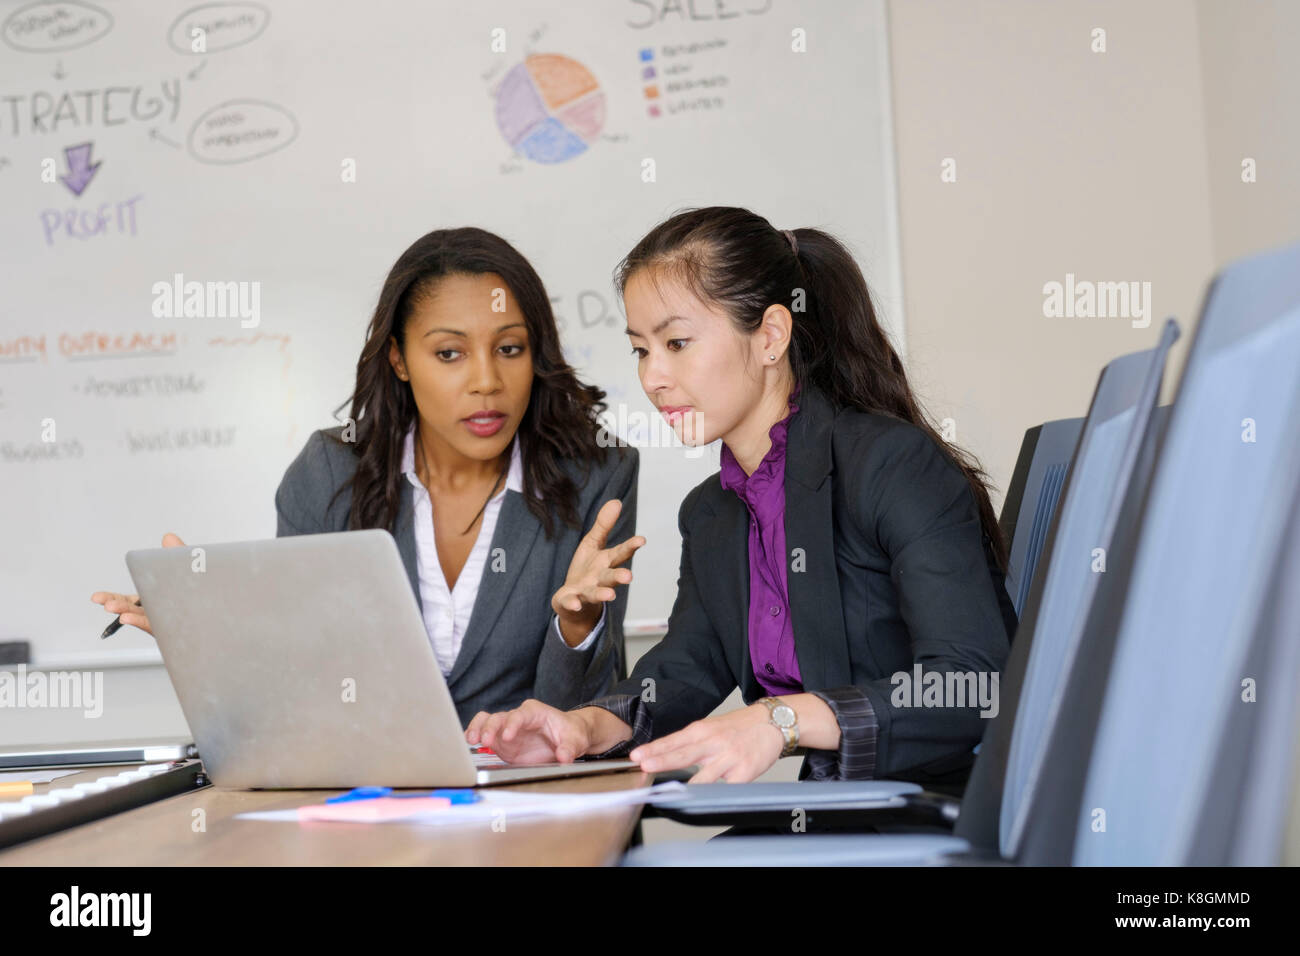 Two businesswomen in office, looking at laptop screen Stock Photo